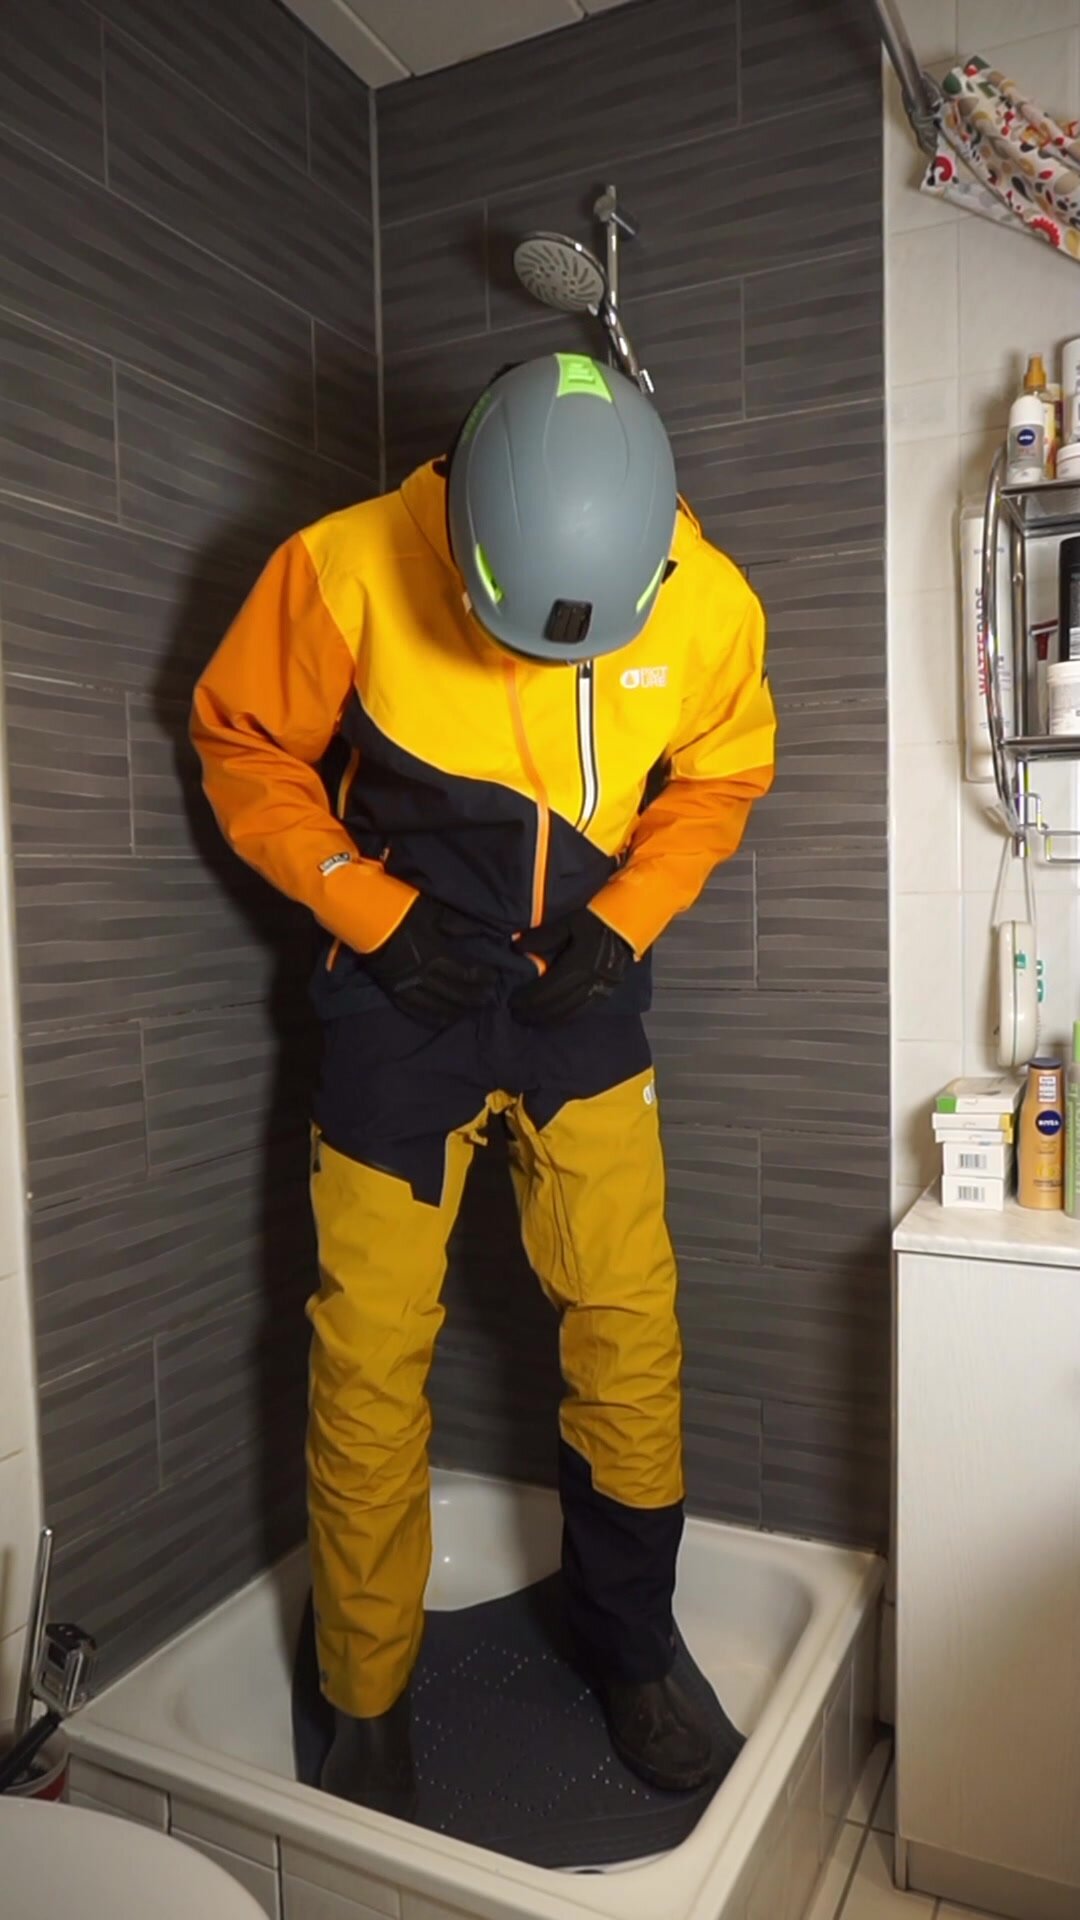 Skiboy piss his new skigear desperate